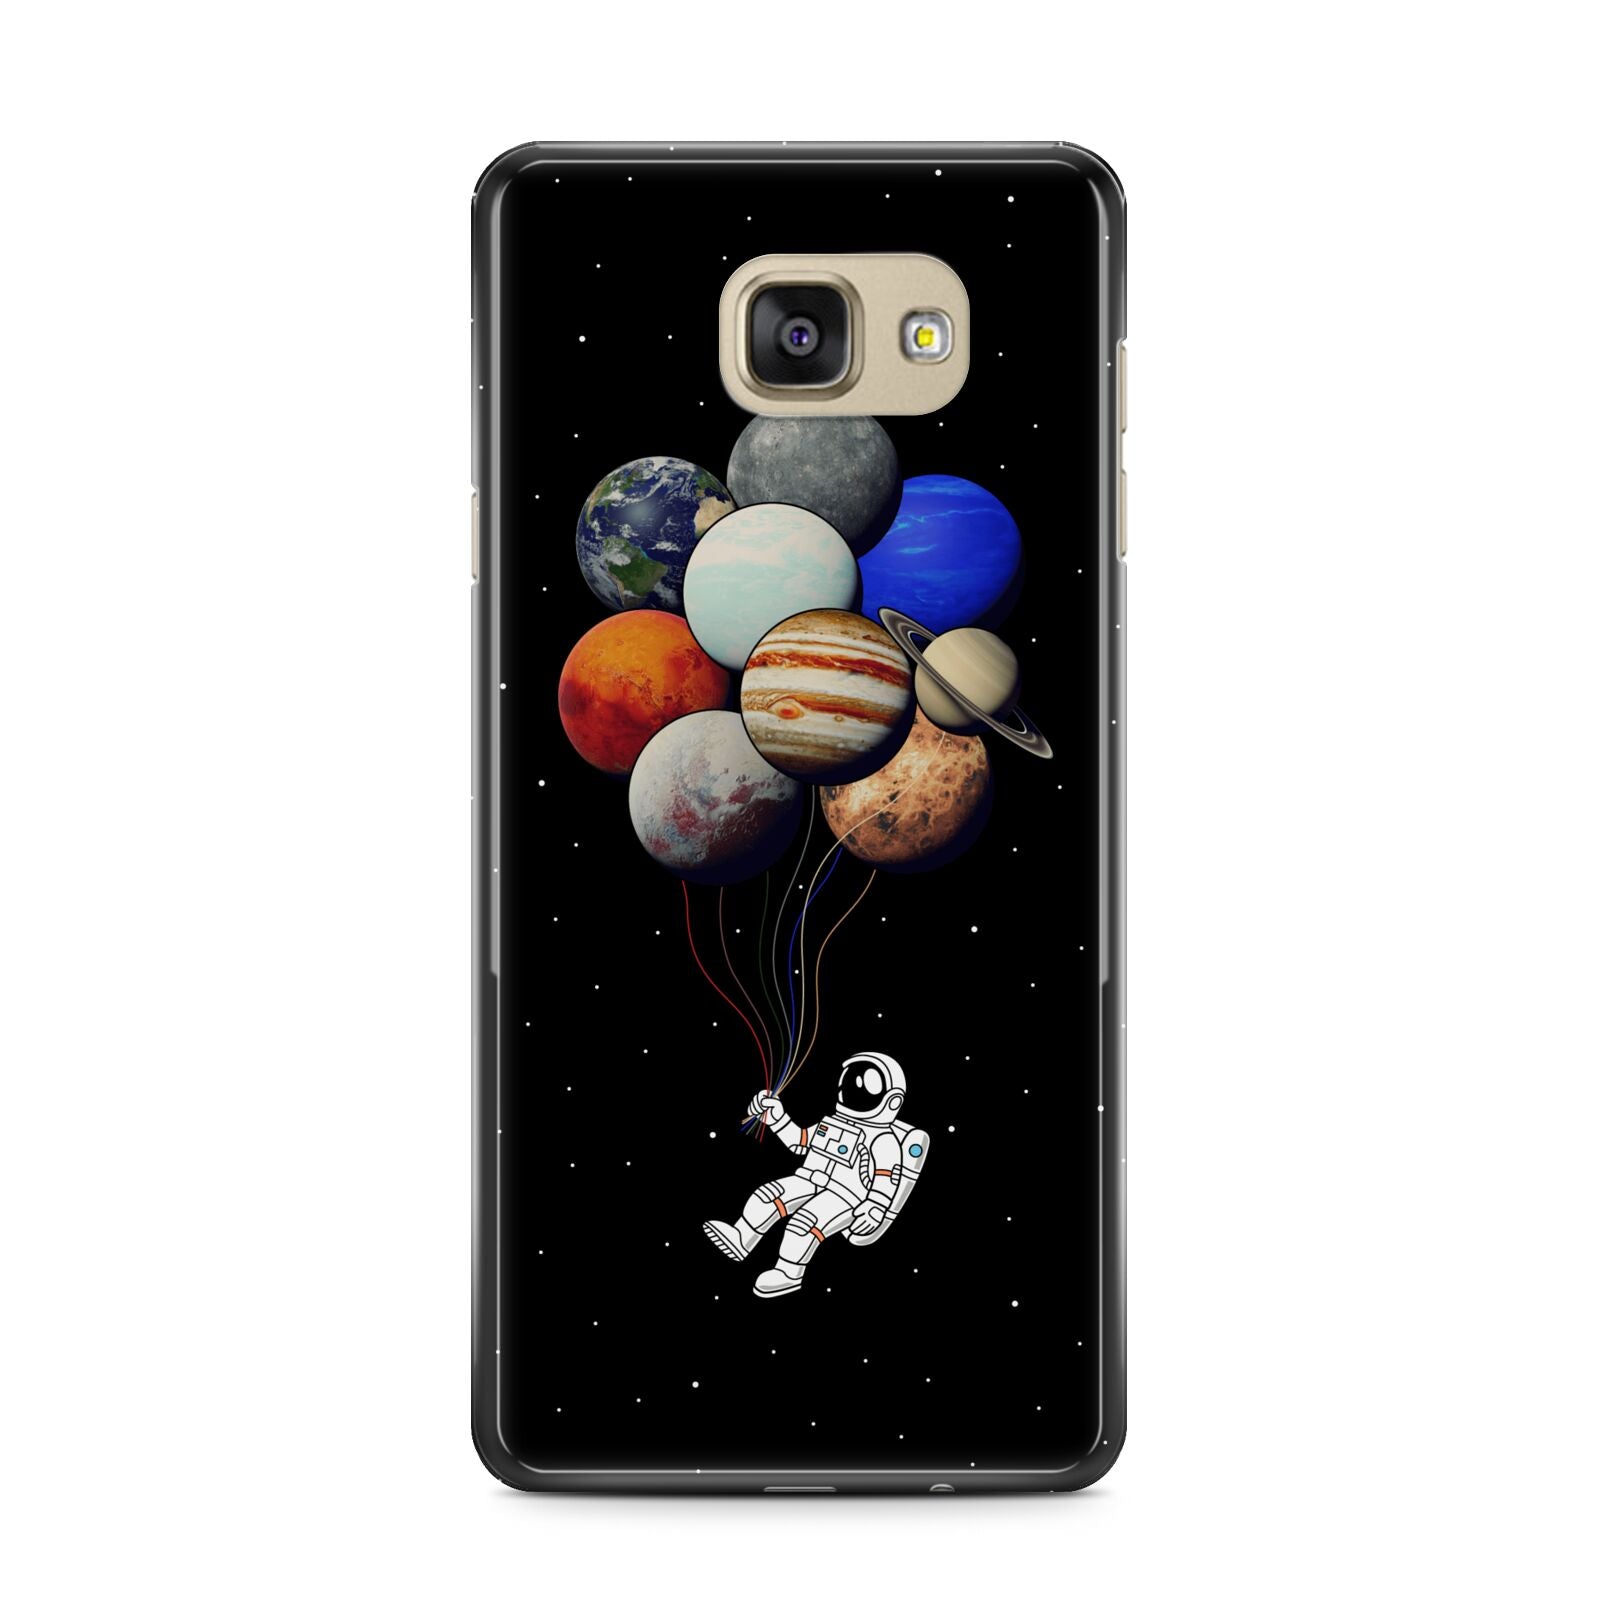 Astronaut Planet Balloons Samsung Galaxy A7 2016 Case on gold phone